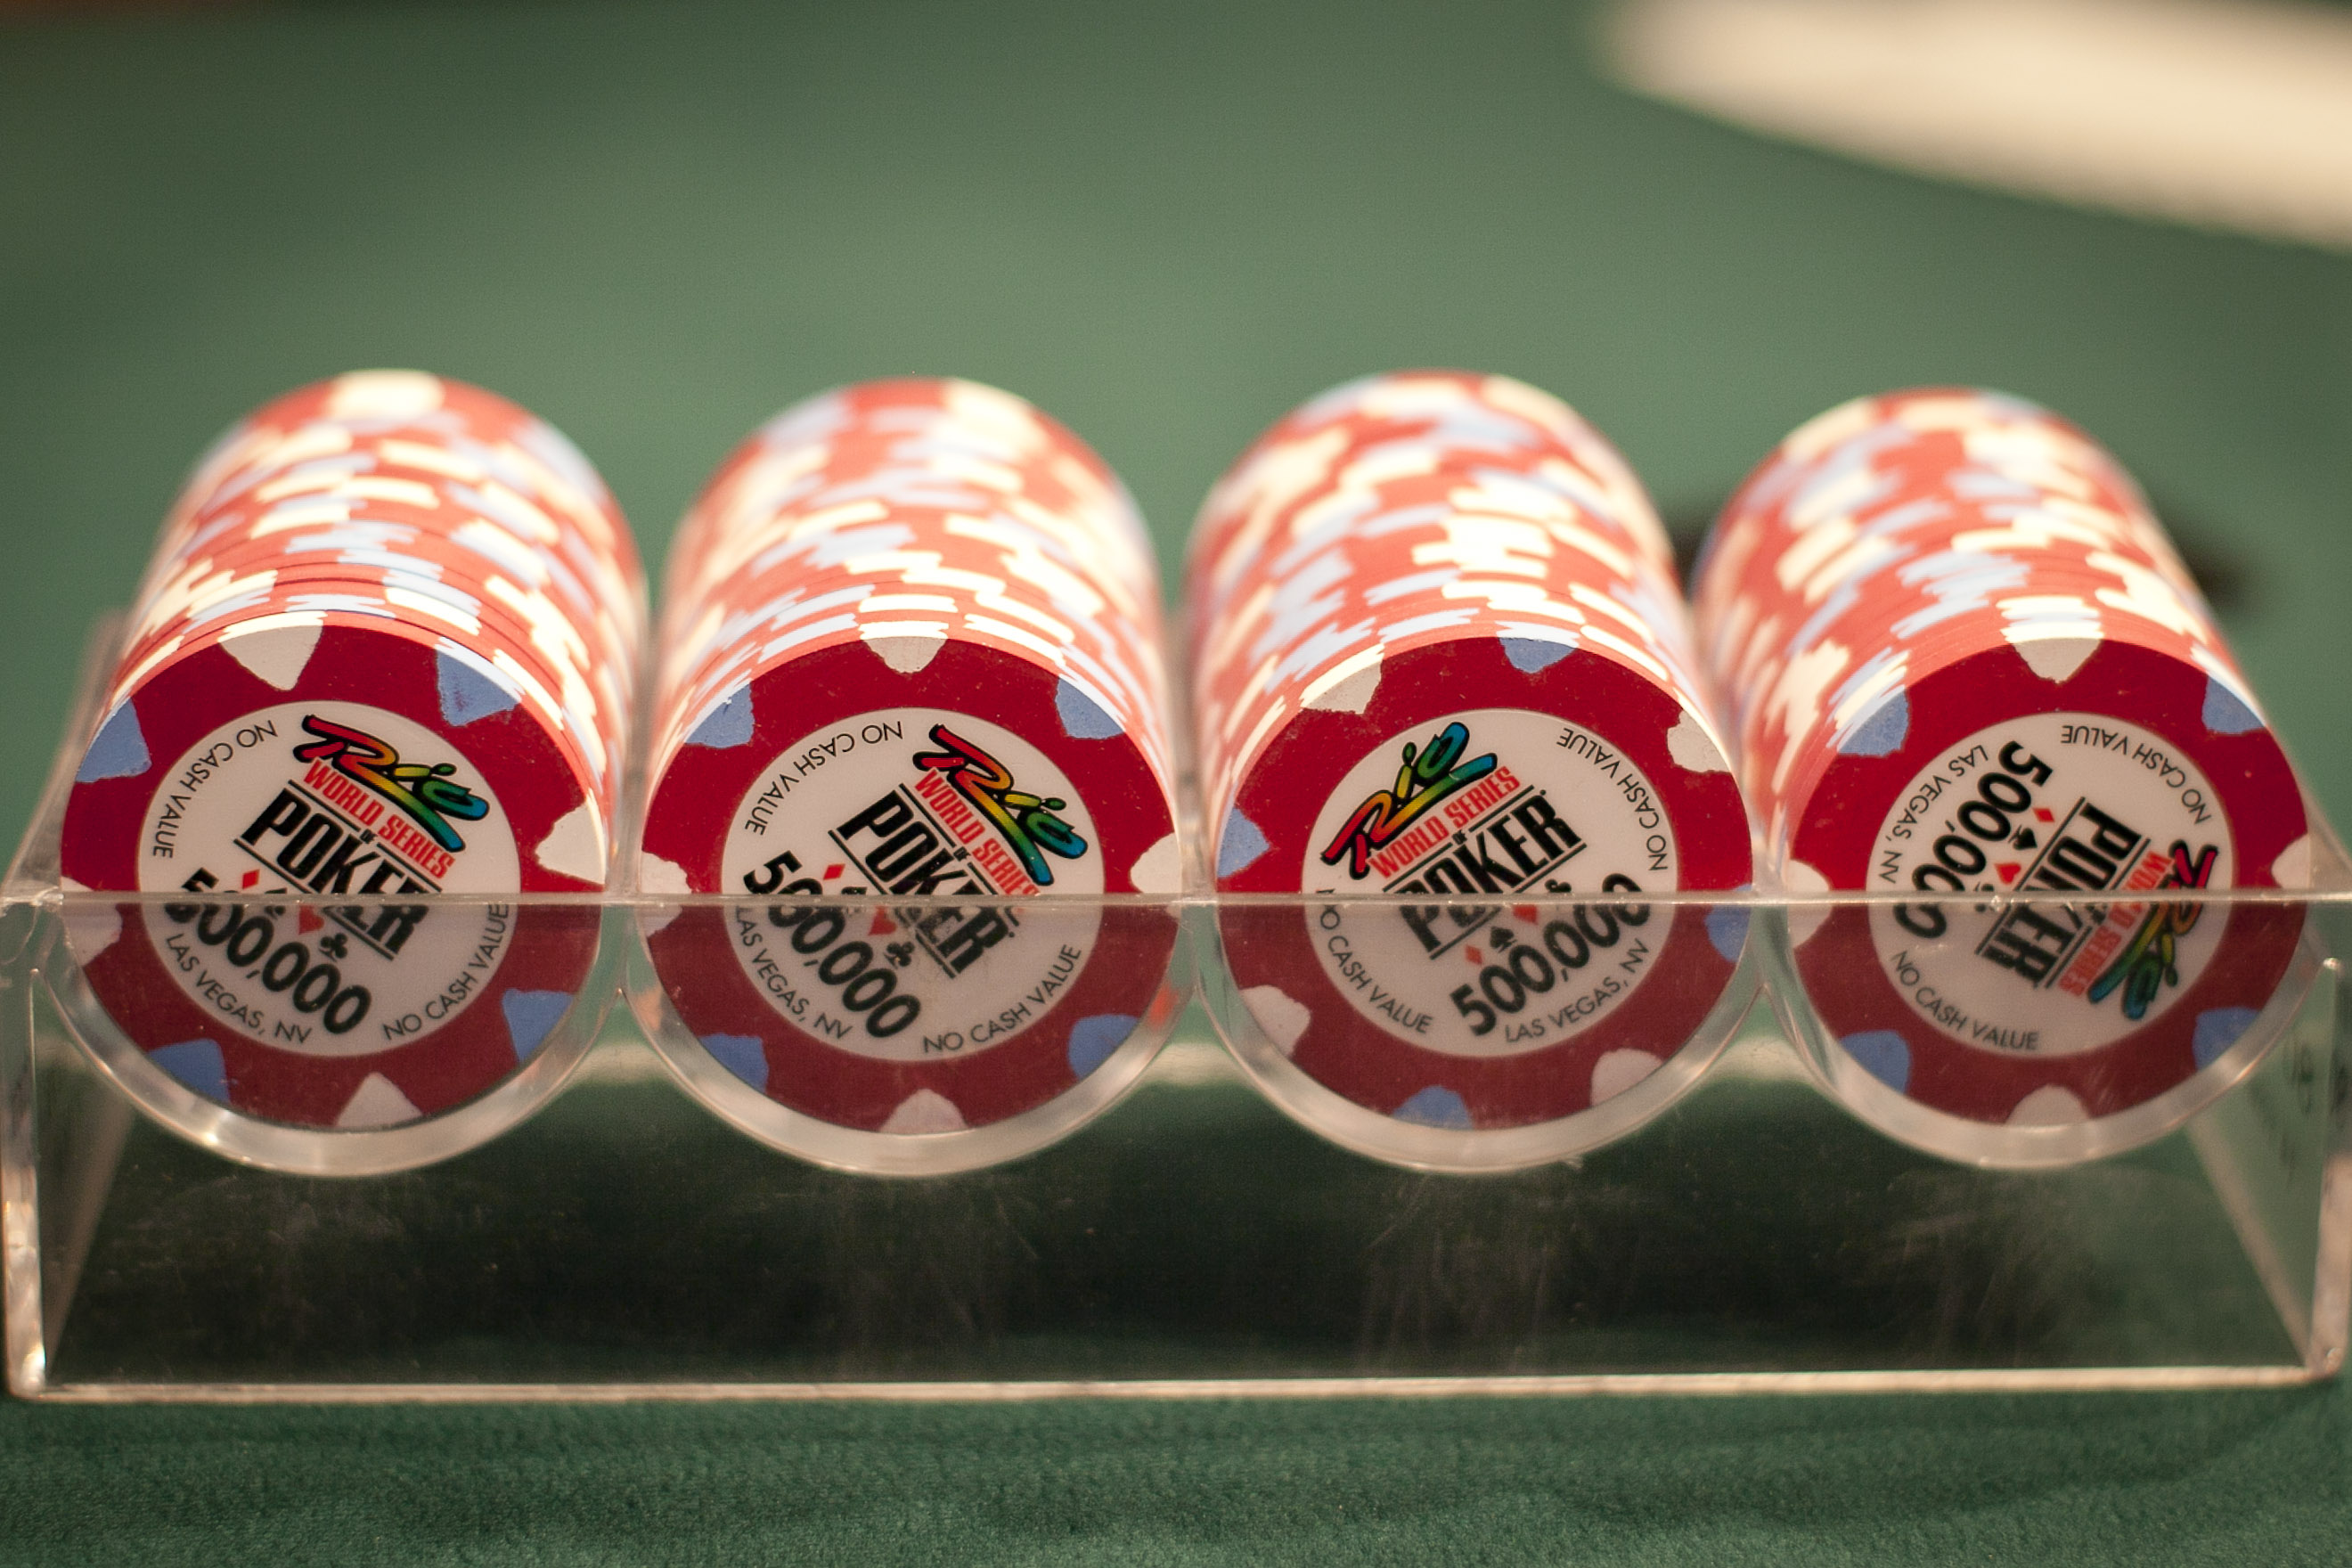 Graphing the Changing Chip Stacks at the 2014 WSOP Main